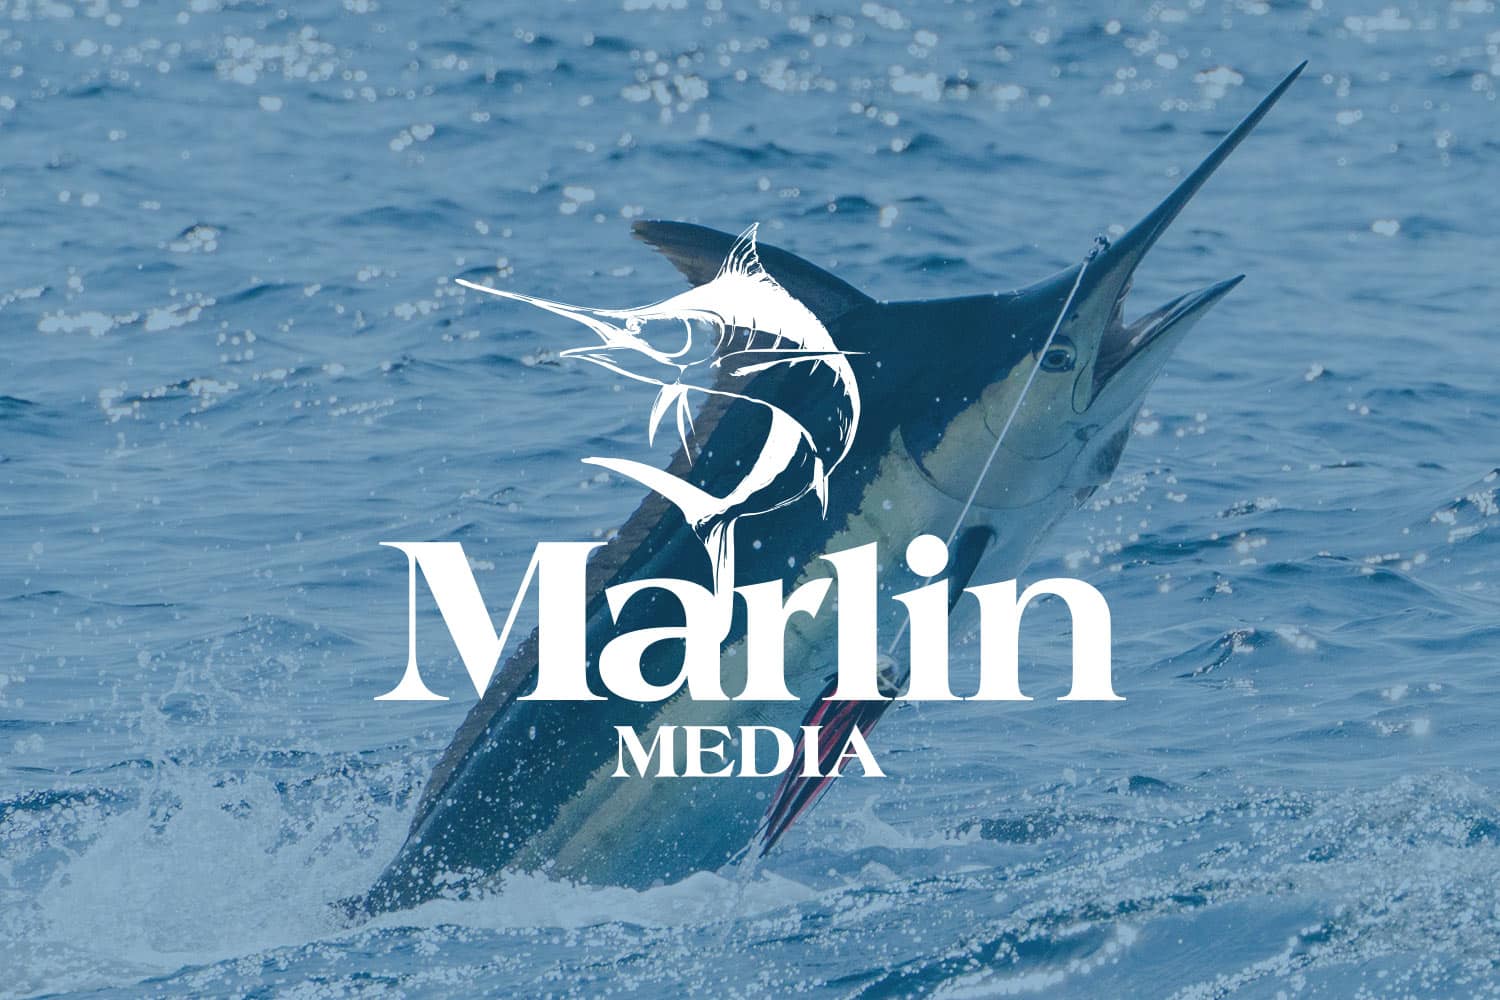 Marlin Media logo in white overlaid a blue-filter picture of a Marlin jumping out of the water on the lead.